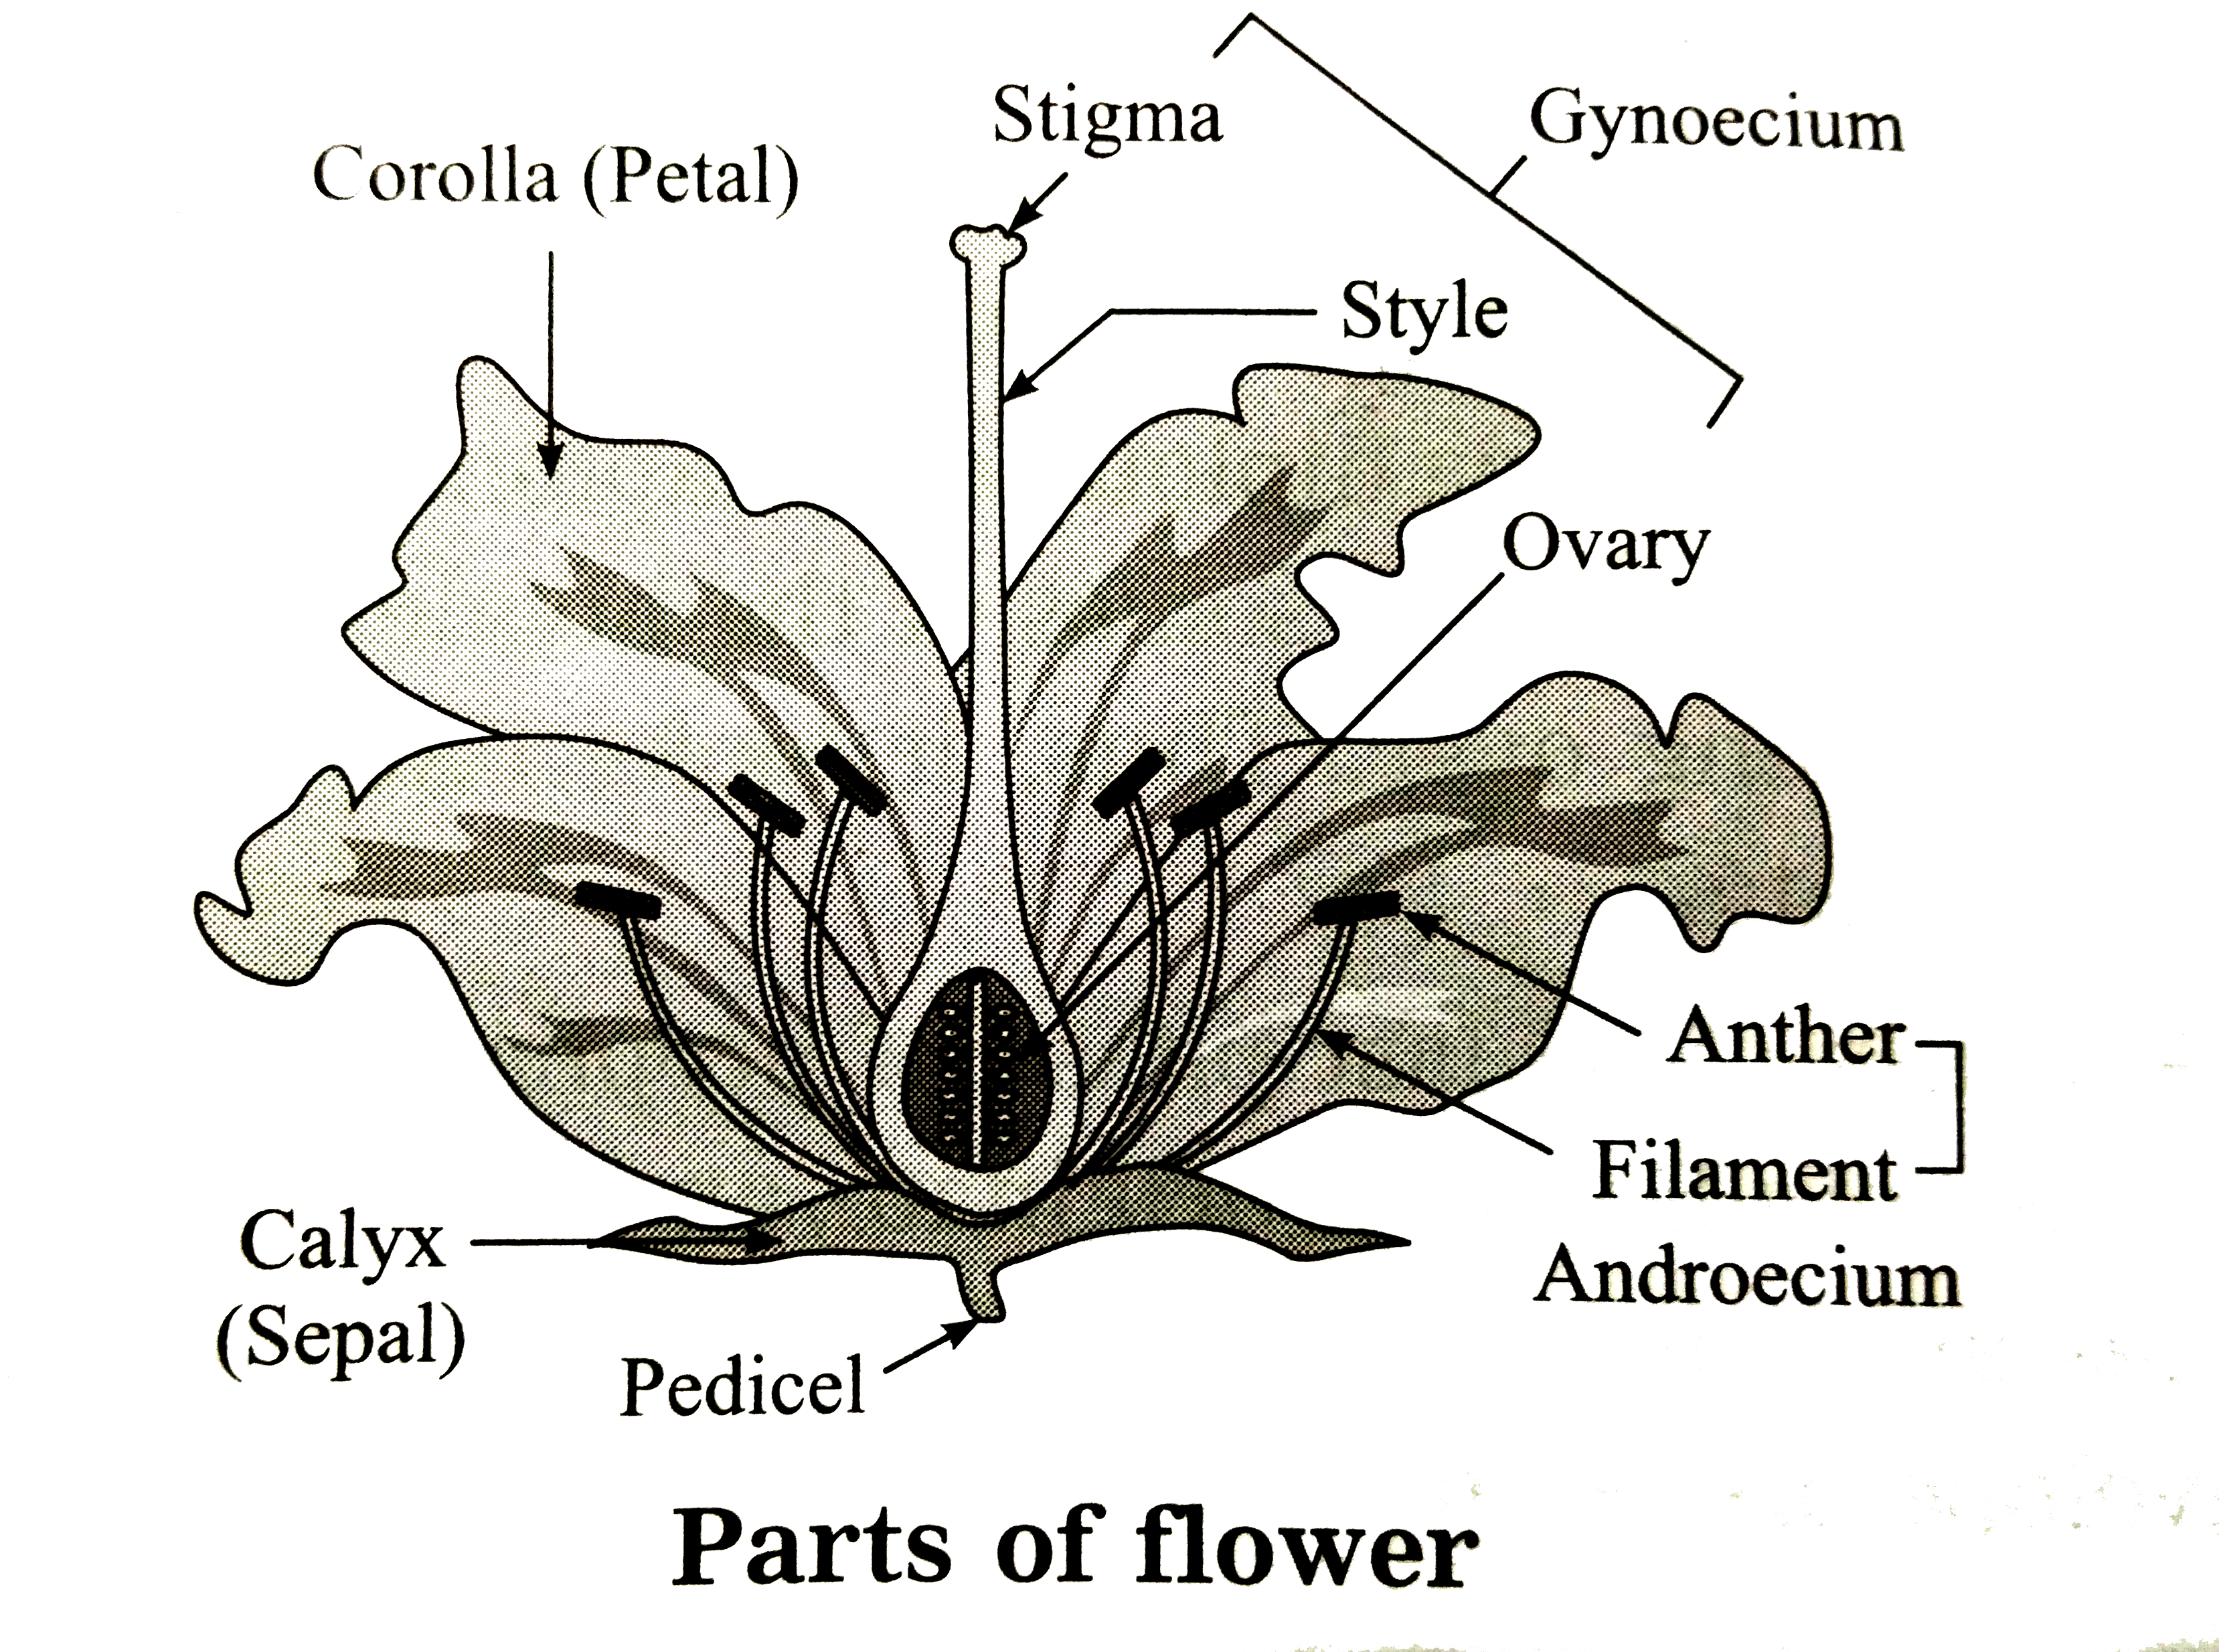 Parts Of Flower With Accessory And Essential Whorls